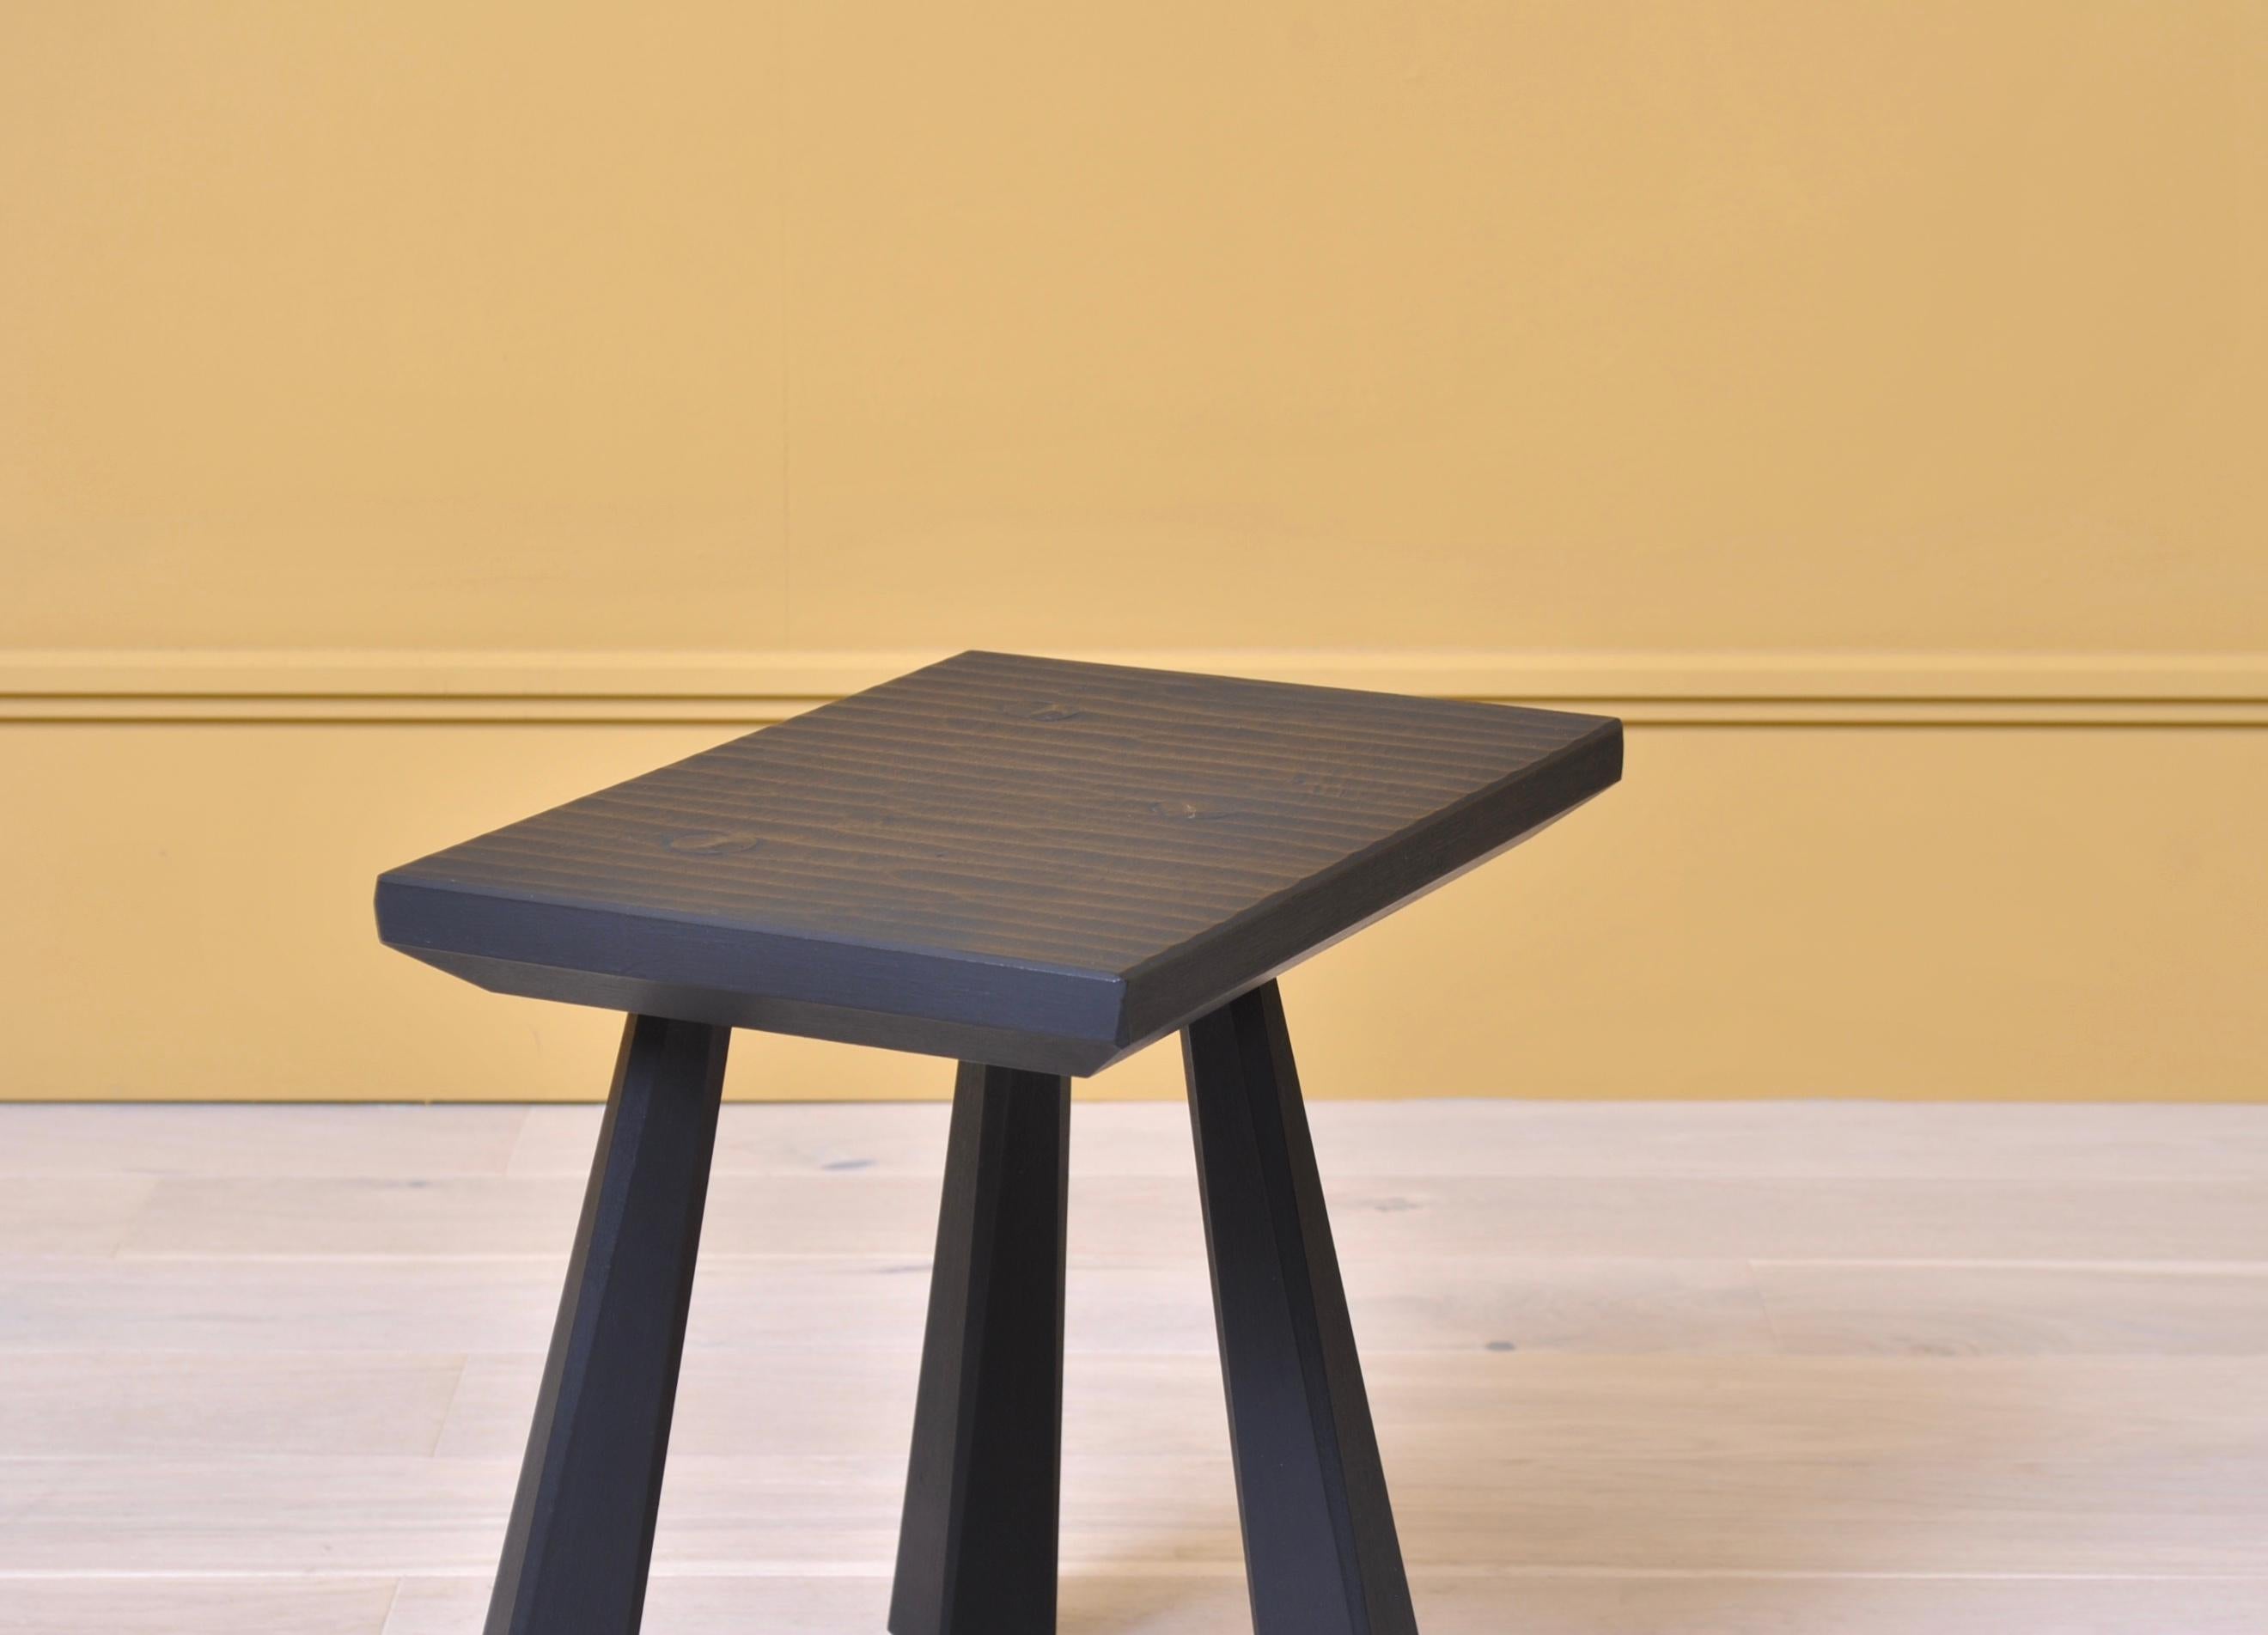 staked stool